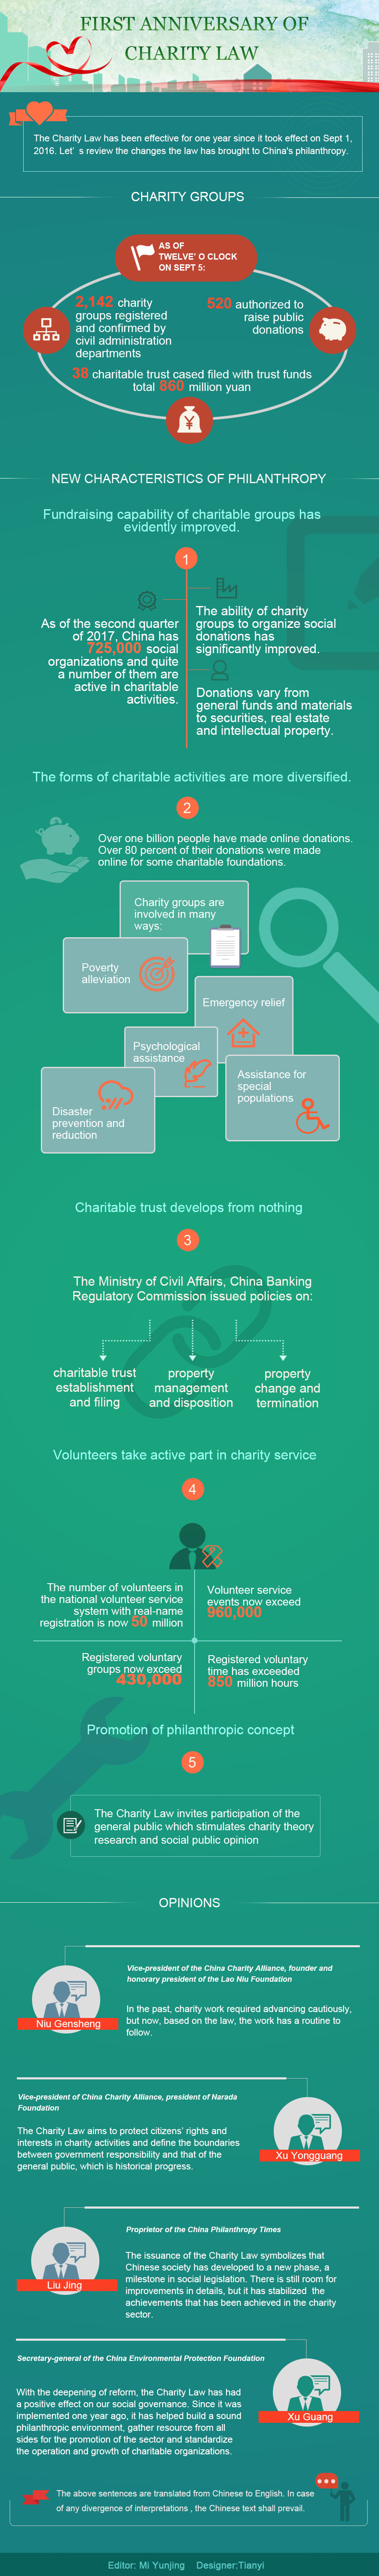 First Anniversary of Charity Law